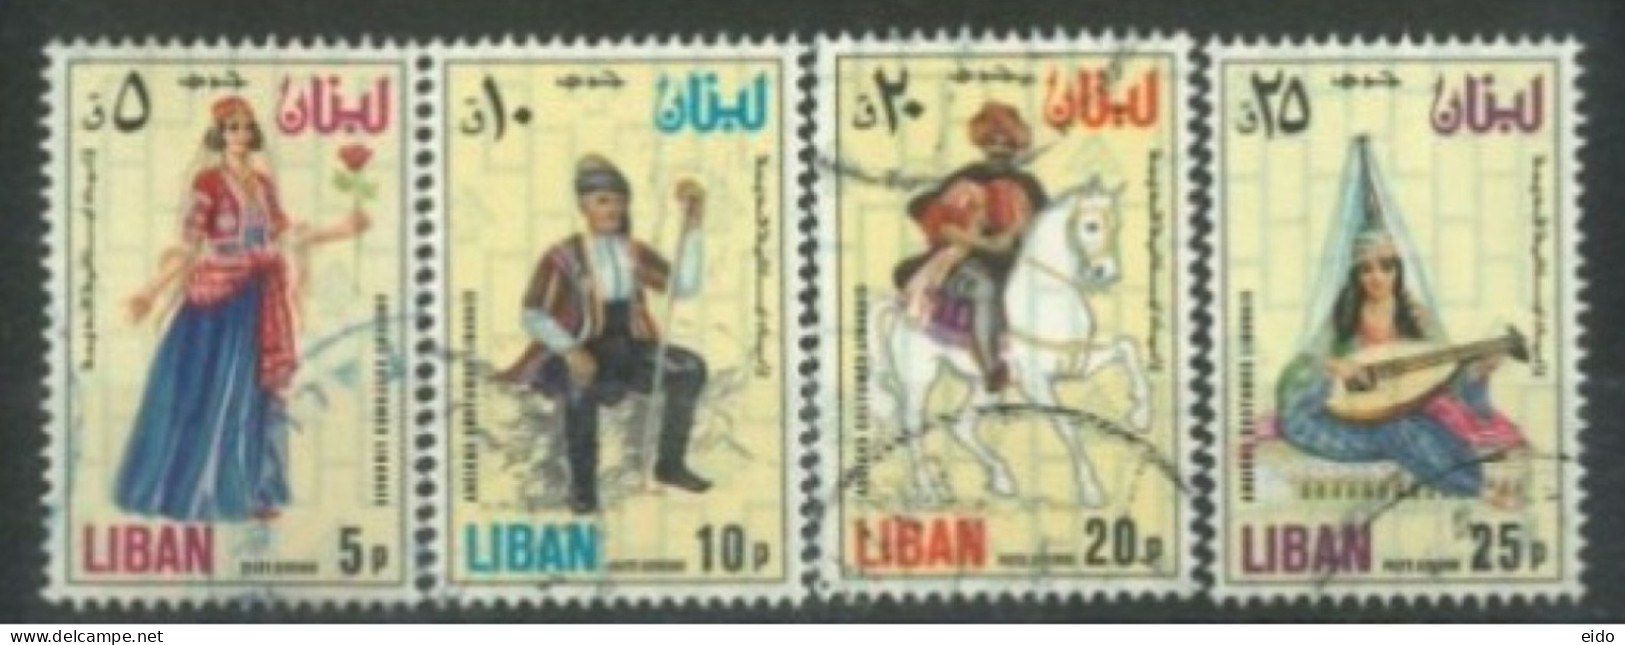 LEBANON. 1978, TRADITIONAL COSTUMES STAMPS ISSUES OF 1973 SURCHARG COMPLETE SET OF 4, SG #1247/50, USED, - Lebanon